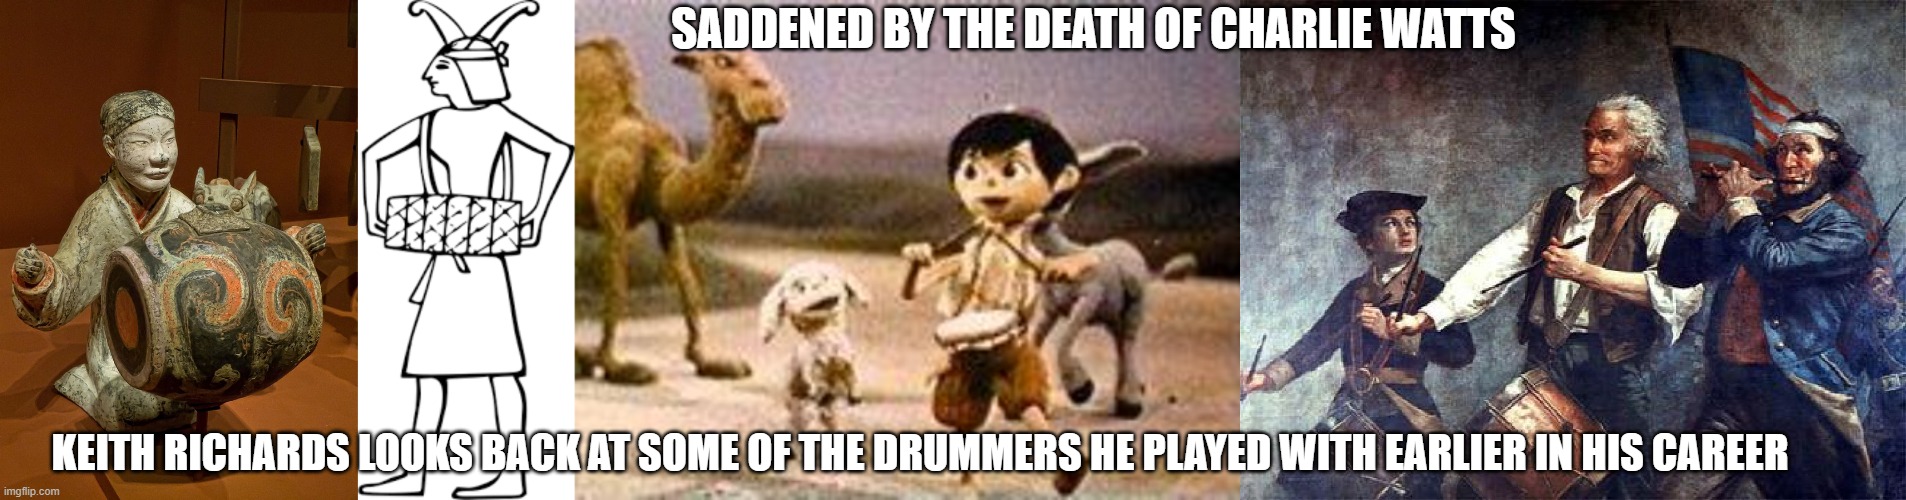 drummers in keith richards' life | SADDENED BY THE DEATH OF CHARLIE WATTS; KEITH RICHARDS LOOKS BACK AT SOME OF THE DRUMMERS HE PLAYED WITH EARLIER IN HIS CAREER | image tagged in drummer boy,fife and drum | made w/ Imgflip meme maker